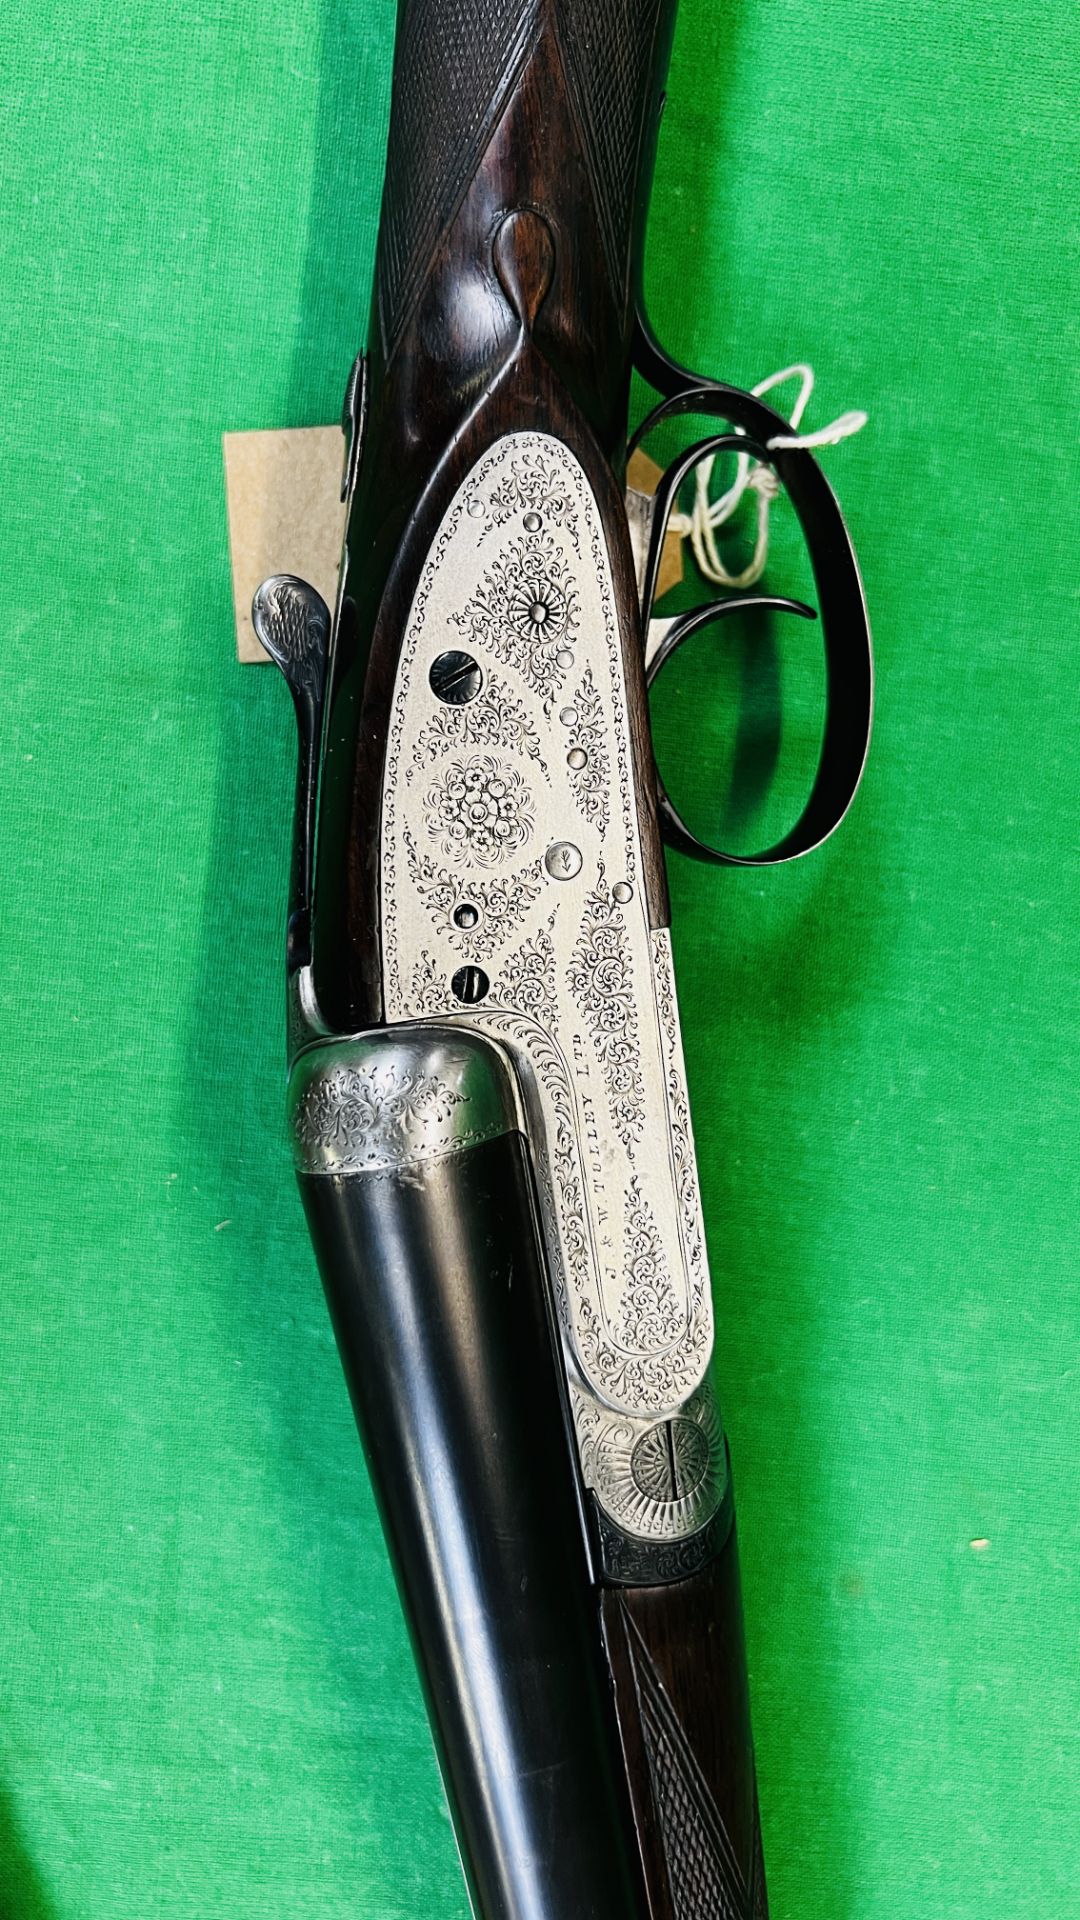 12 BORE TOLLEY SIDE BY SIDE SHOTGUN #8670, 28" BARRELS (2 3/4" CHAMBER), EJECTOR, - Image 10 of 37